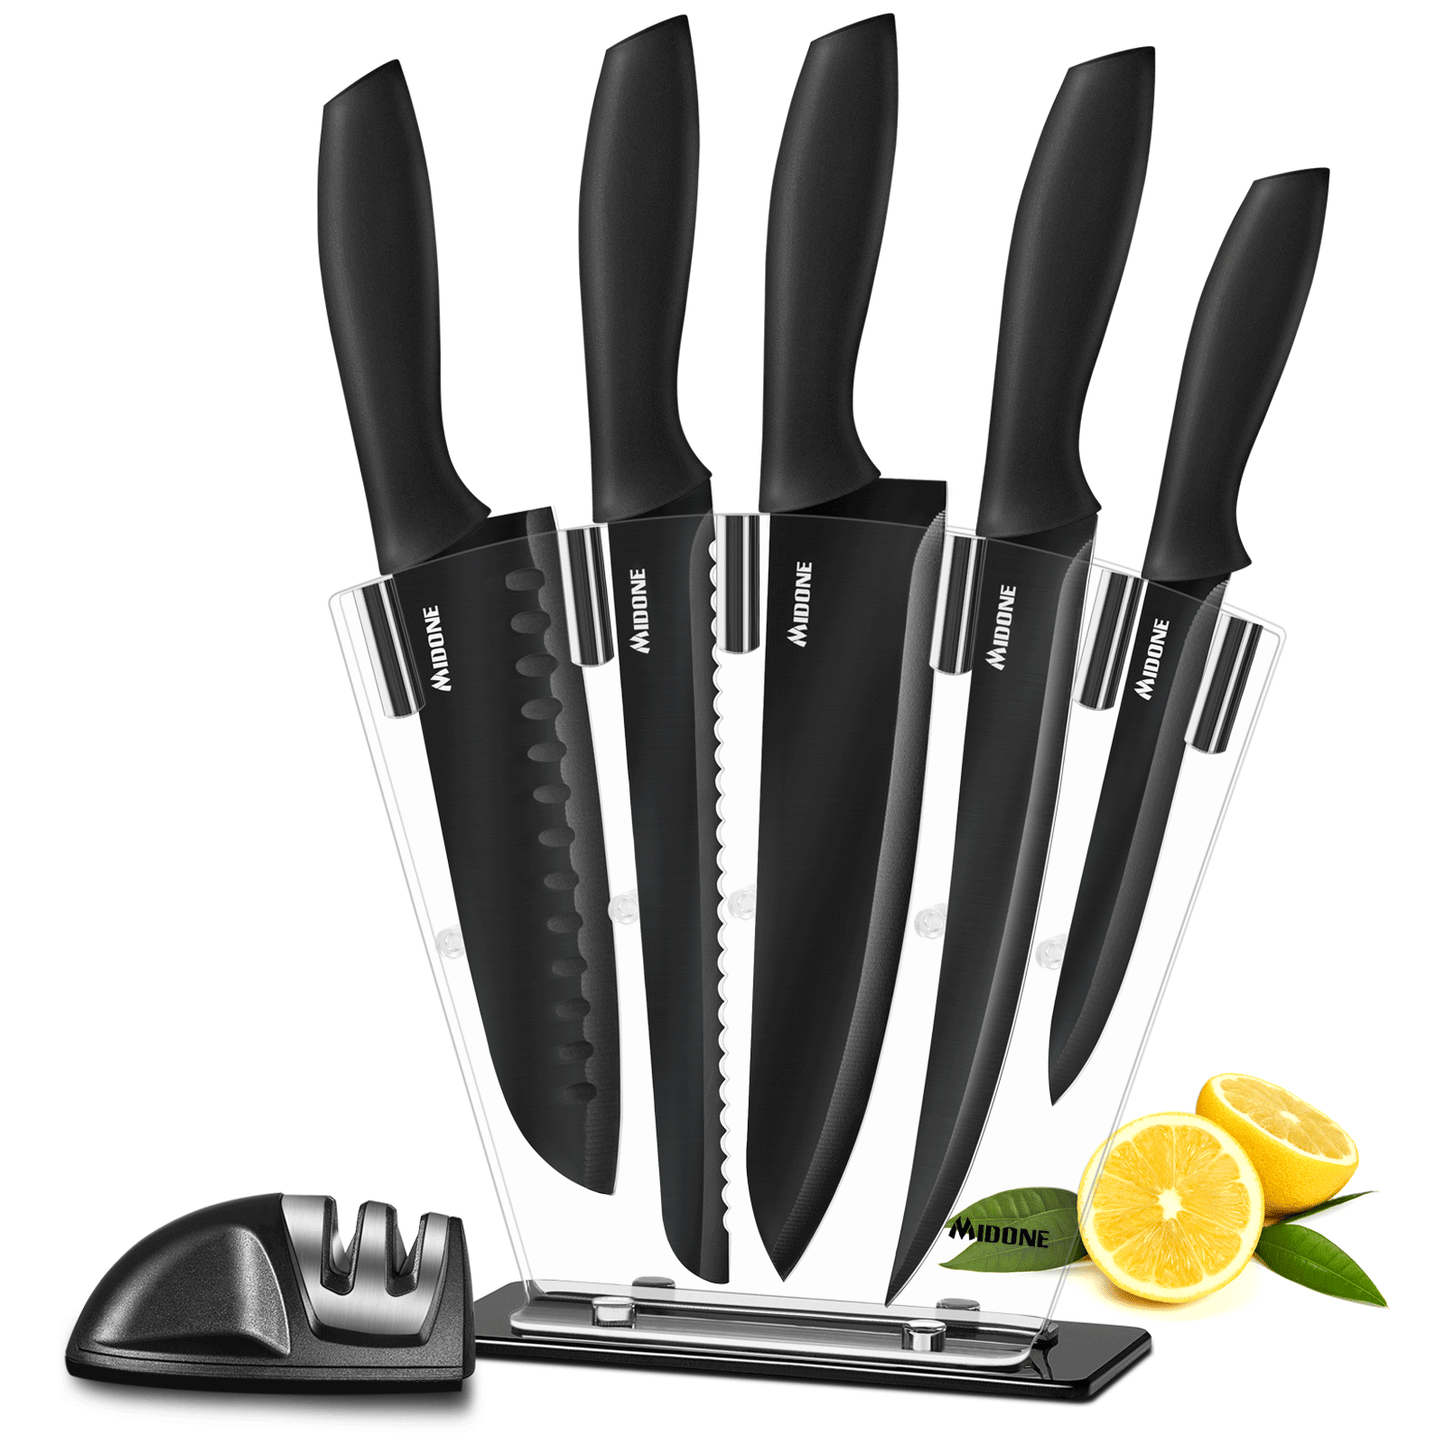 MIDONE Knife Set, 7 pcs German High Carbon Stainless Steel Kitchen Knife Set, with Sharpener & Acrylic Stand, Black